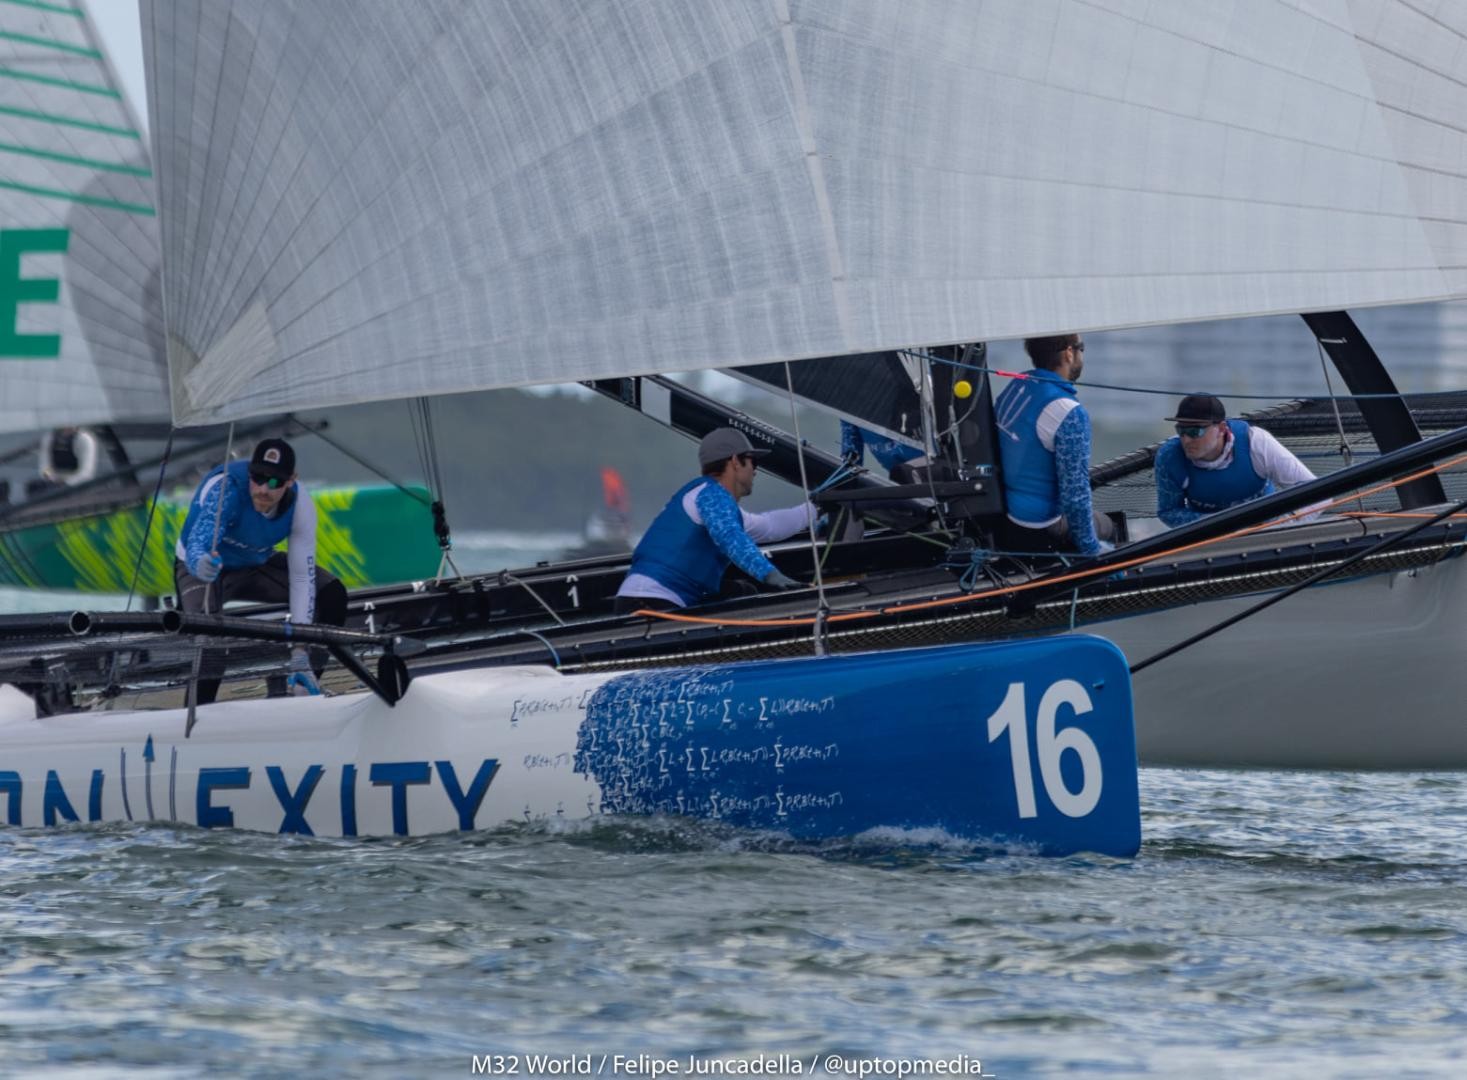 Convexity with skipper Don Wilson and tactician Taylor Canfield winning with one point in Miami